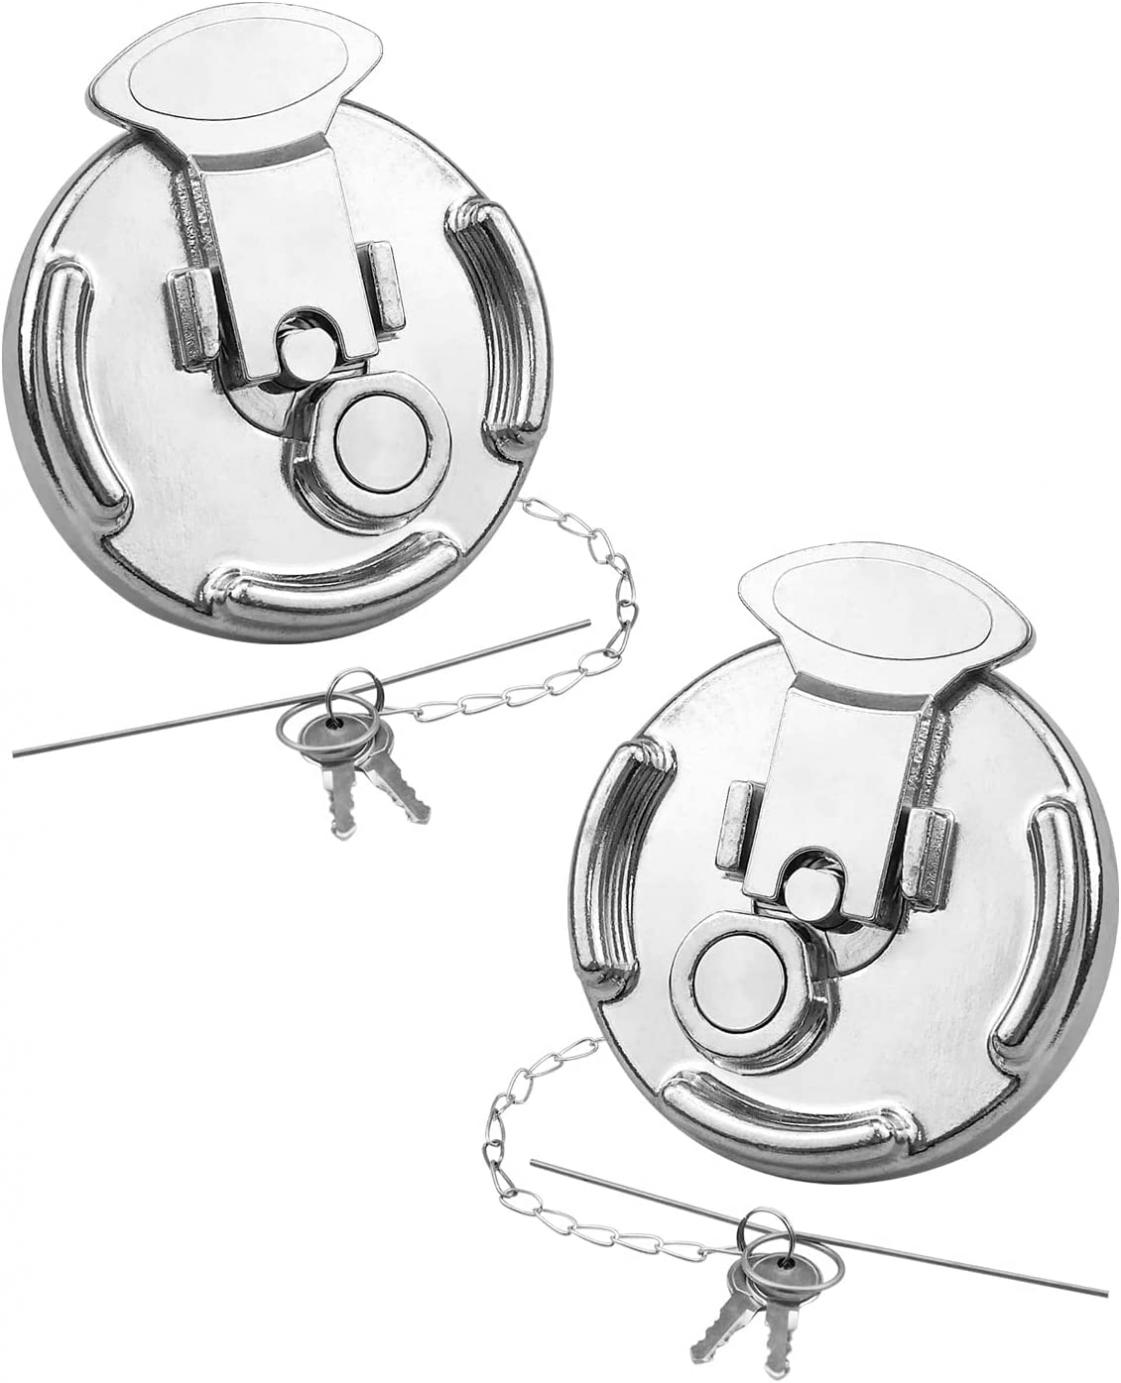 EMIHO Lever Style Locking Diesel Fuel Cap 2 Pack with 4 Keys for 4 Inch Truck Fuel Tank Locking Gas Cap Fit for Peterbilt Trucks Replace 11-04859-100 572.1015 600212